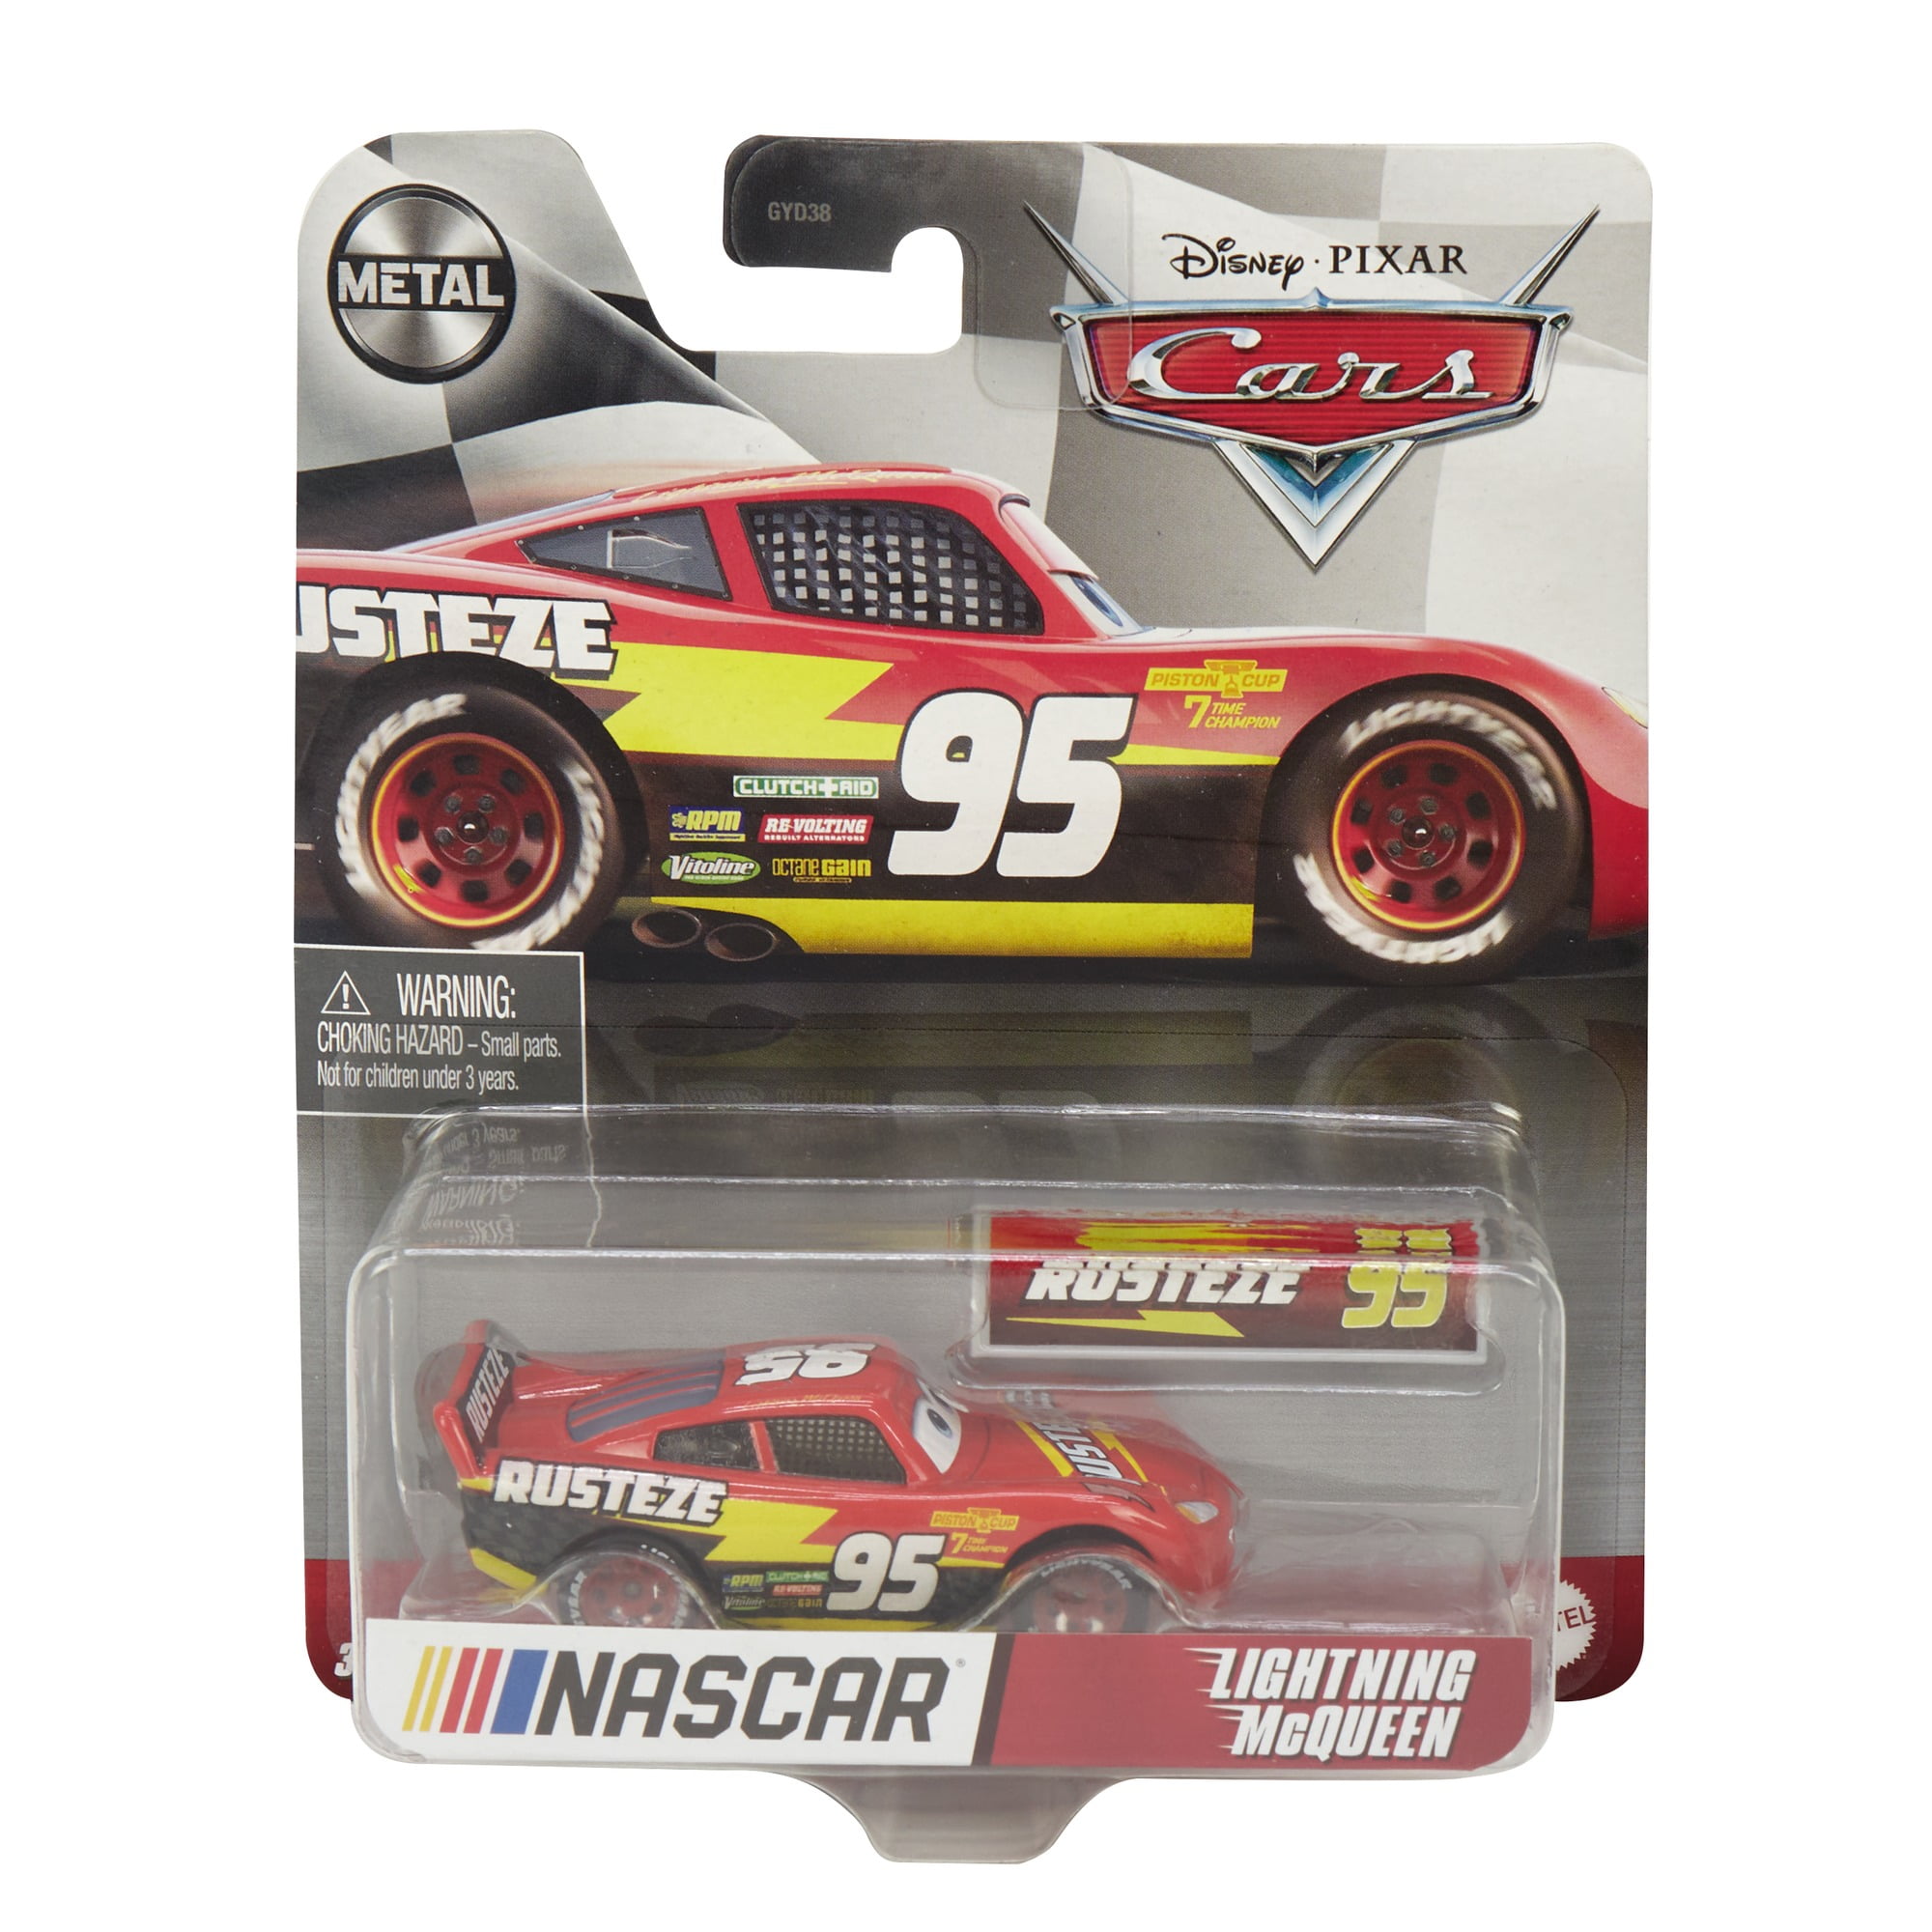 NASCAR Stocking Gifts, NASCAR Stocking Stuffers, Small Gifts